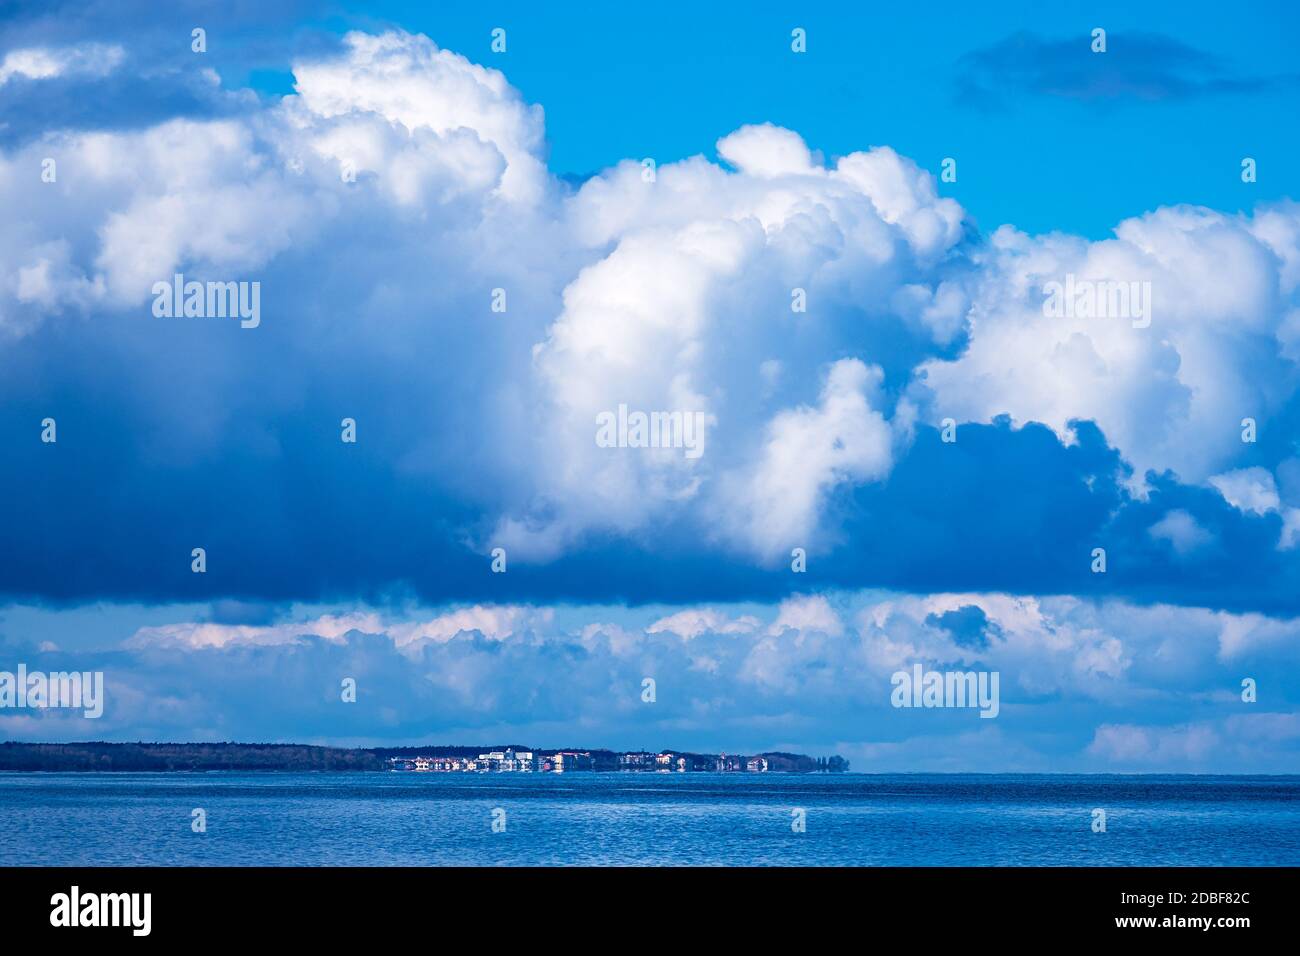 View to Kuehlungsborn from the Baltic Sea coast in Nienhagen, Germany. Stock Photo